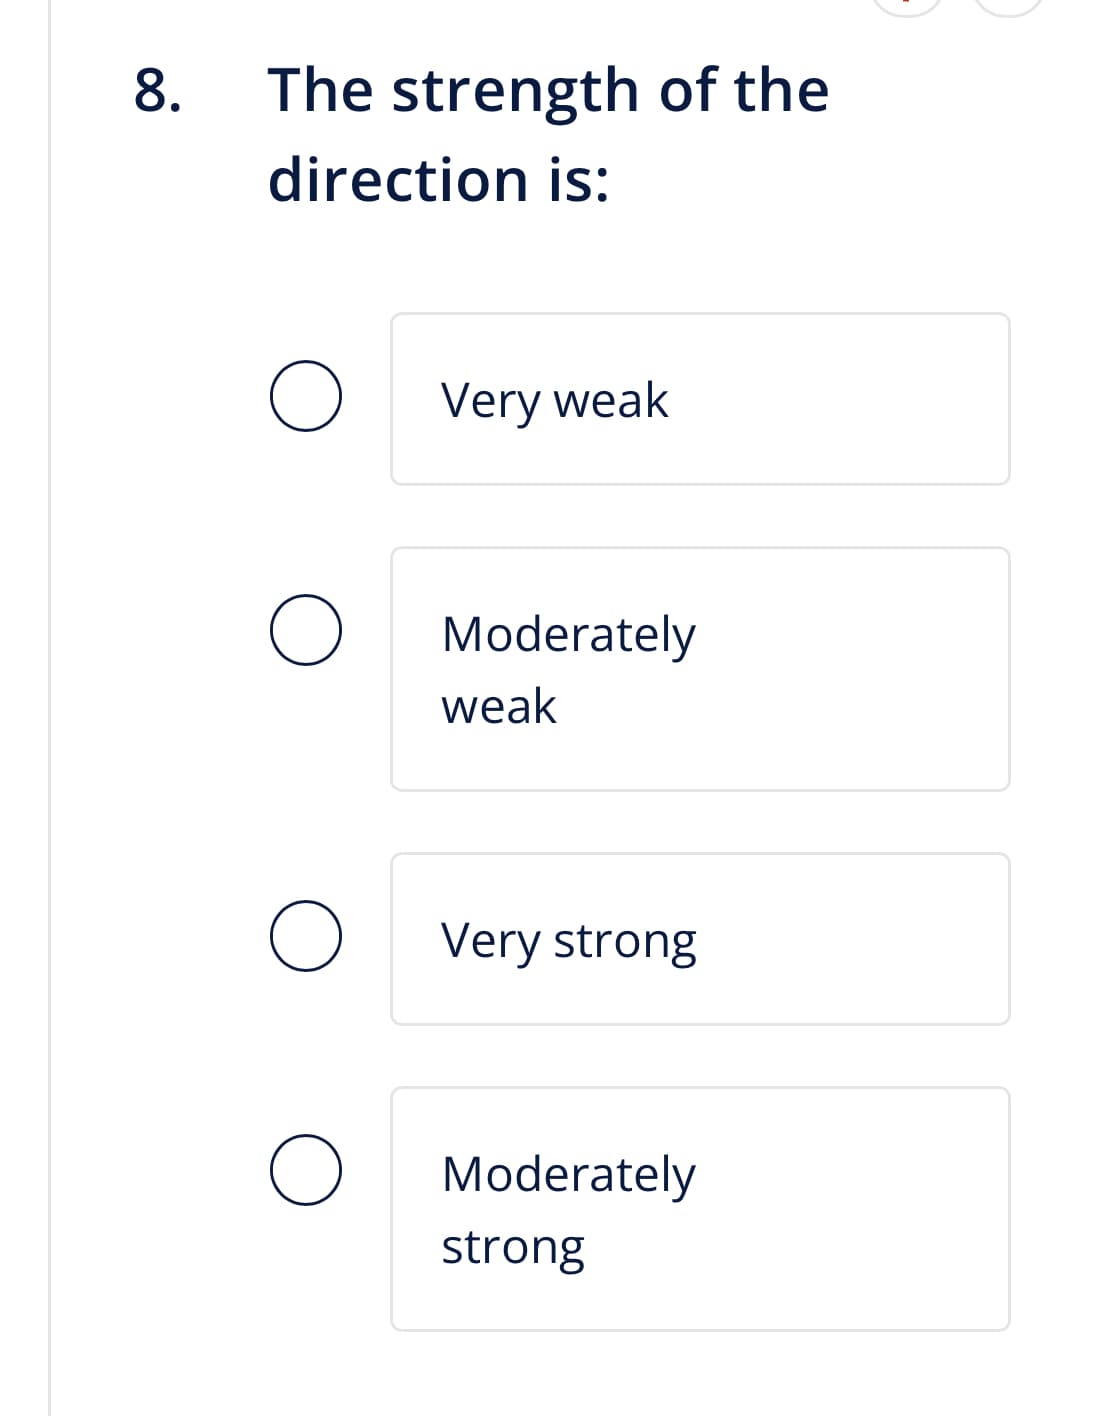 8.
The strength of the
direction is:
O
O
O
Very weak
Moderately
weak
Very strong
Moderately
strong